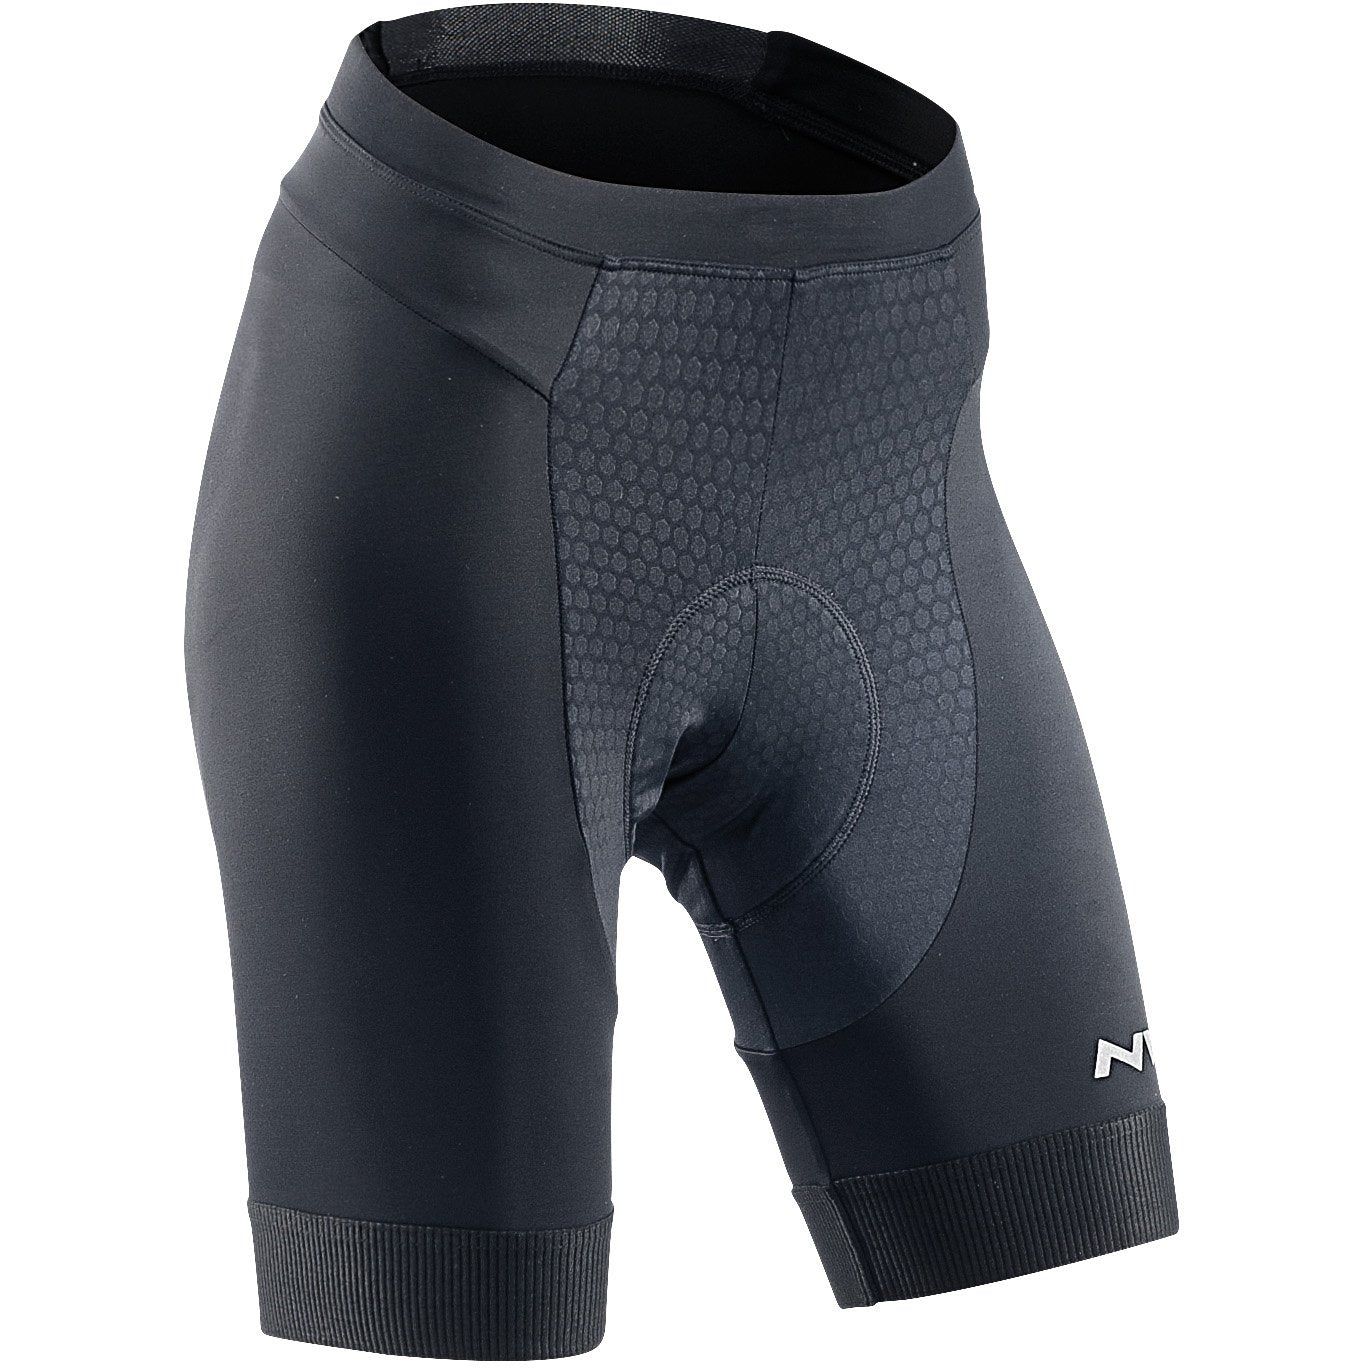 Northwave Womens Active Shorts - Black - Cyclop.in